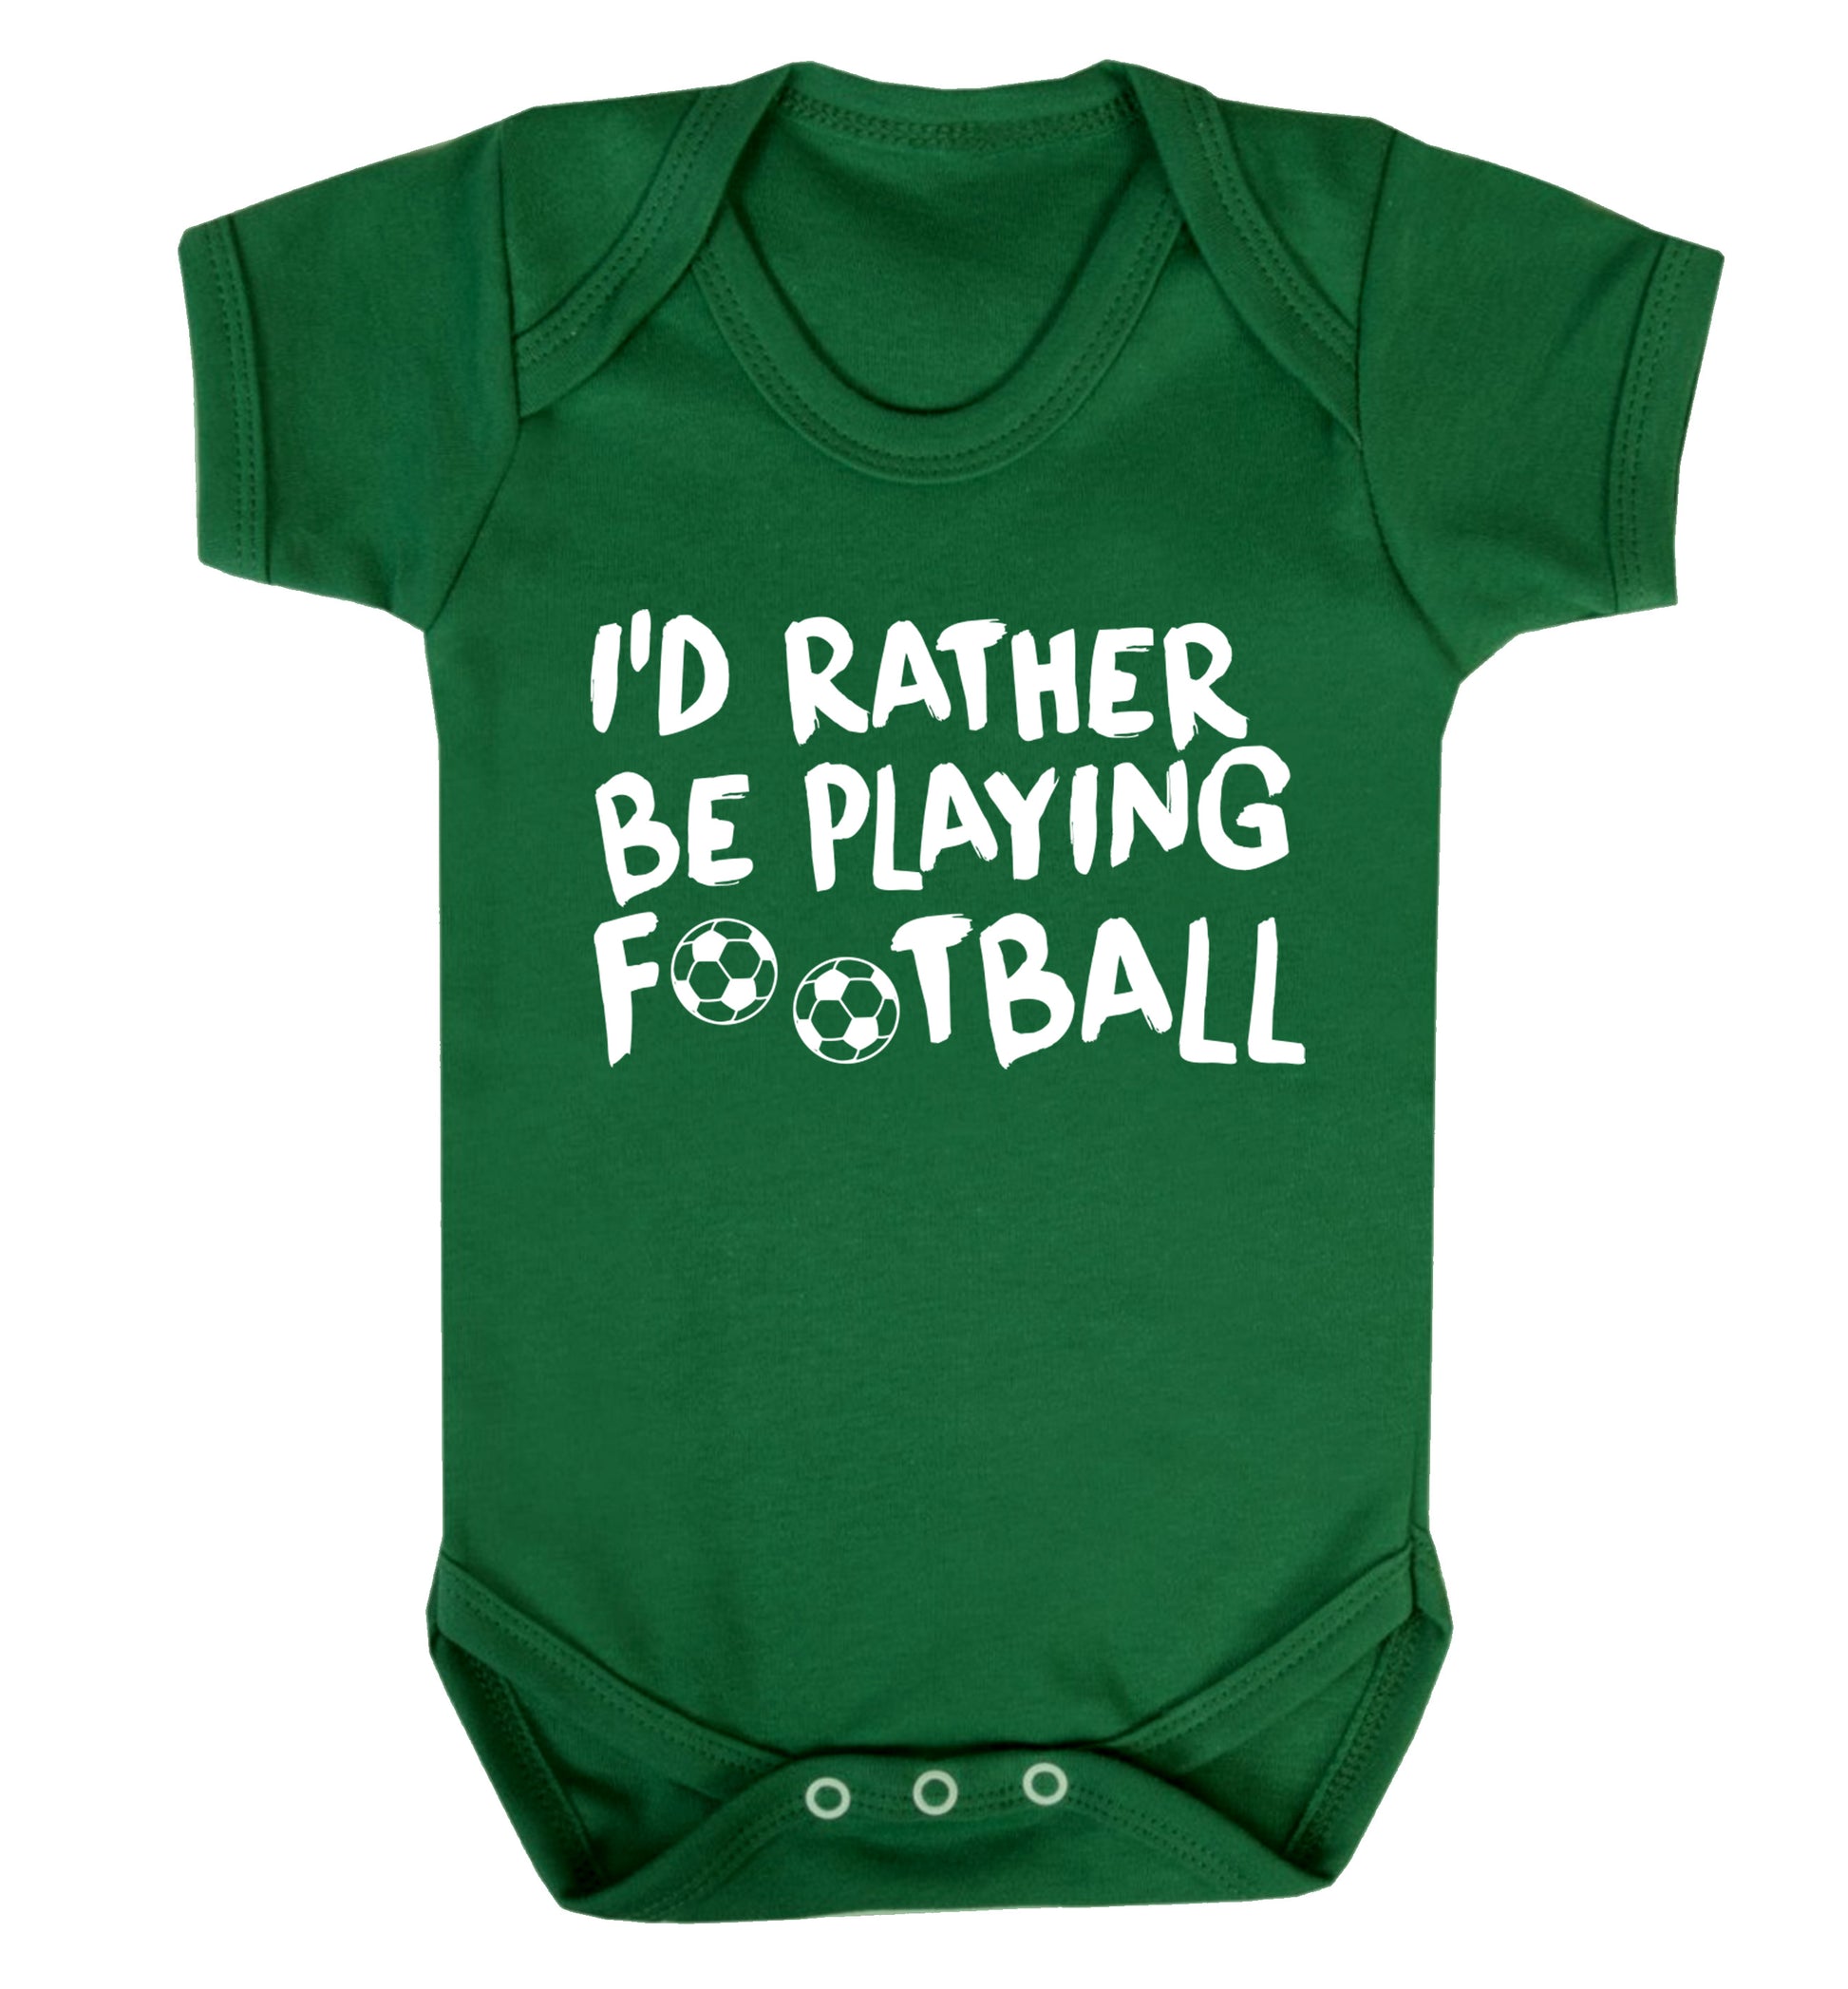 I'd rather be playing football Baby Vest green 18-24 months